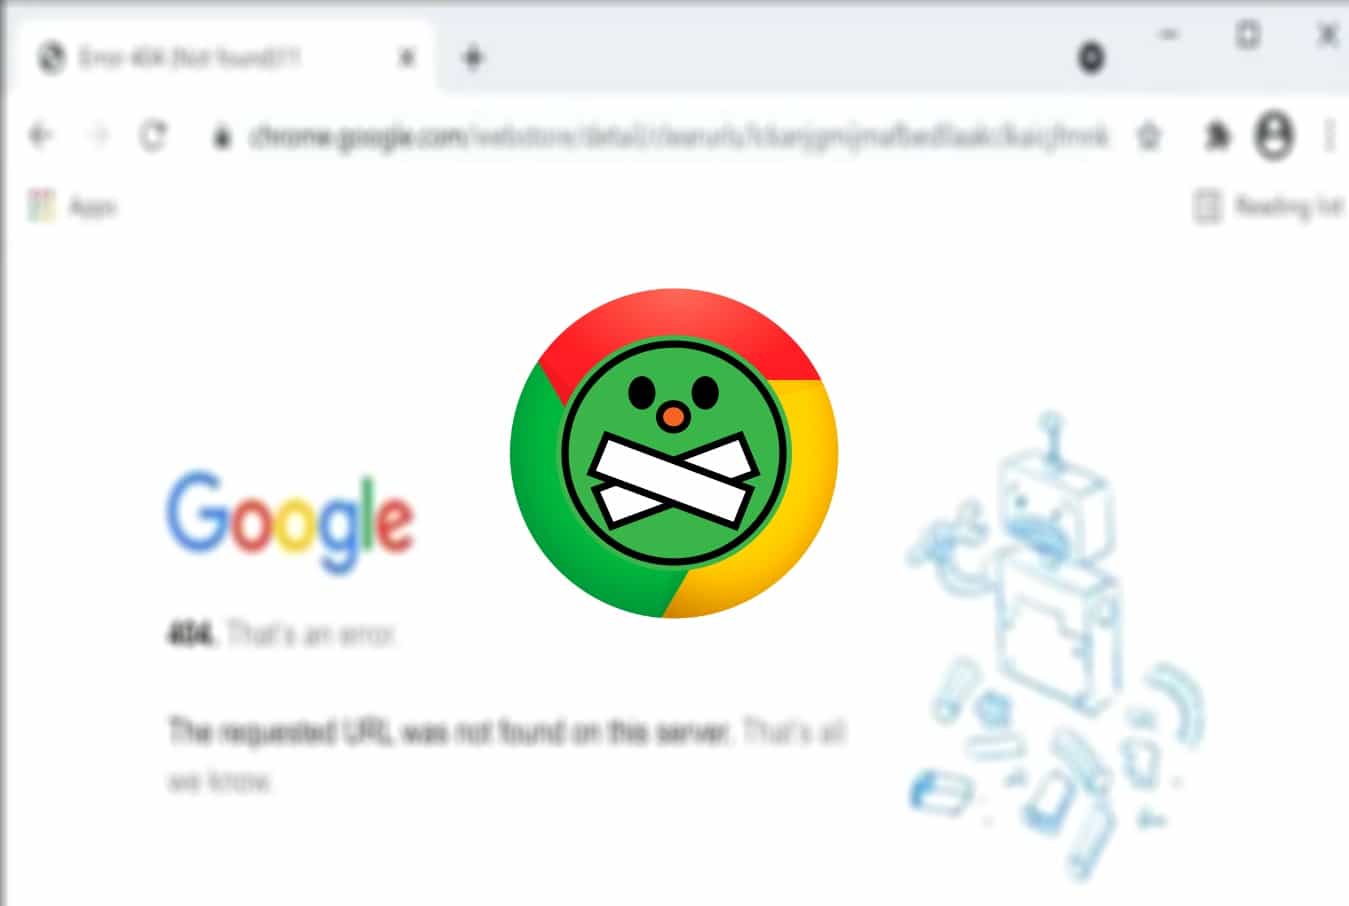 Google removes ClearURLs Chrome extension from its store